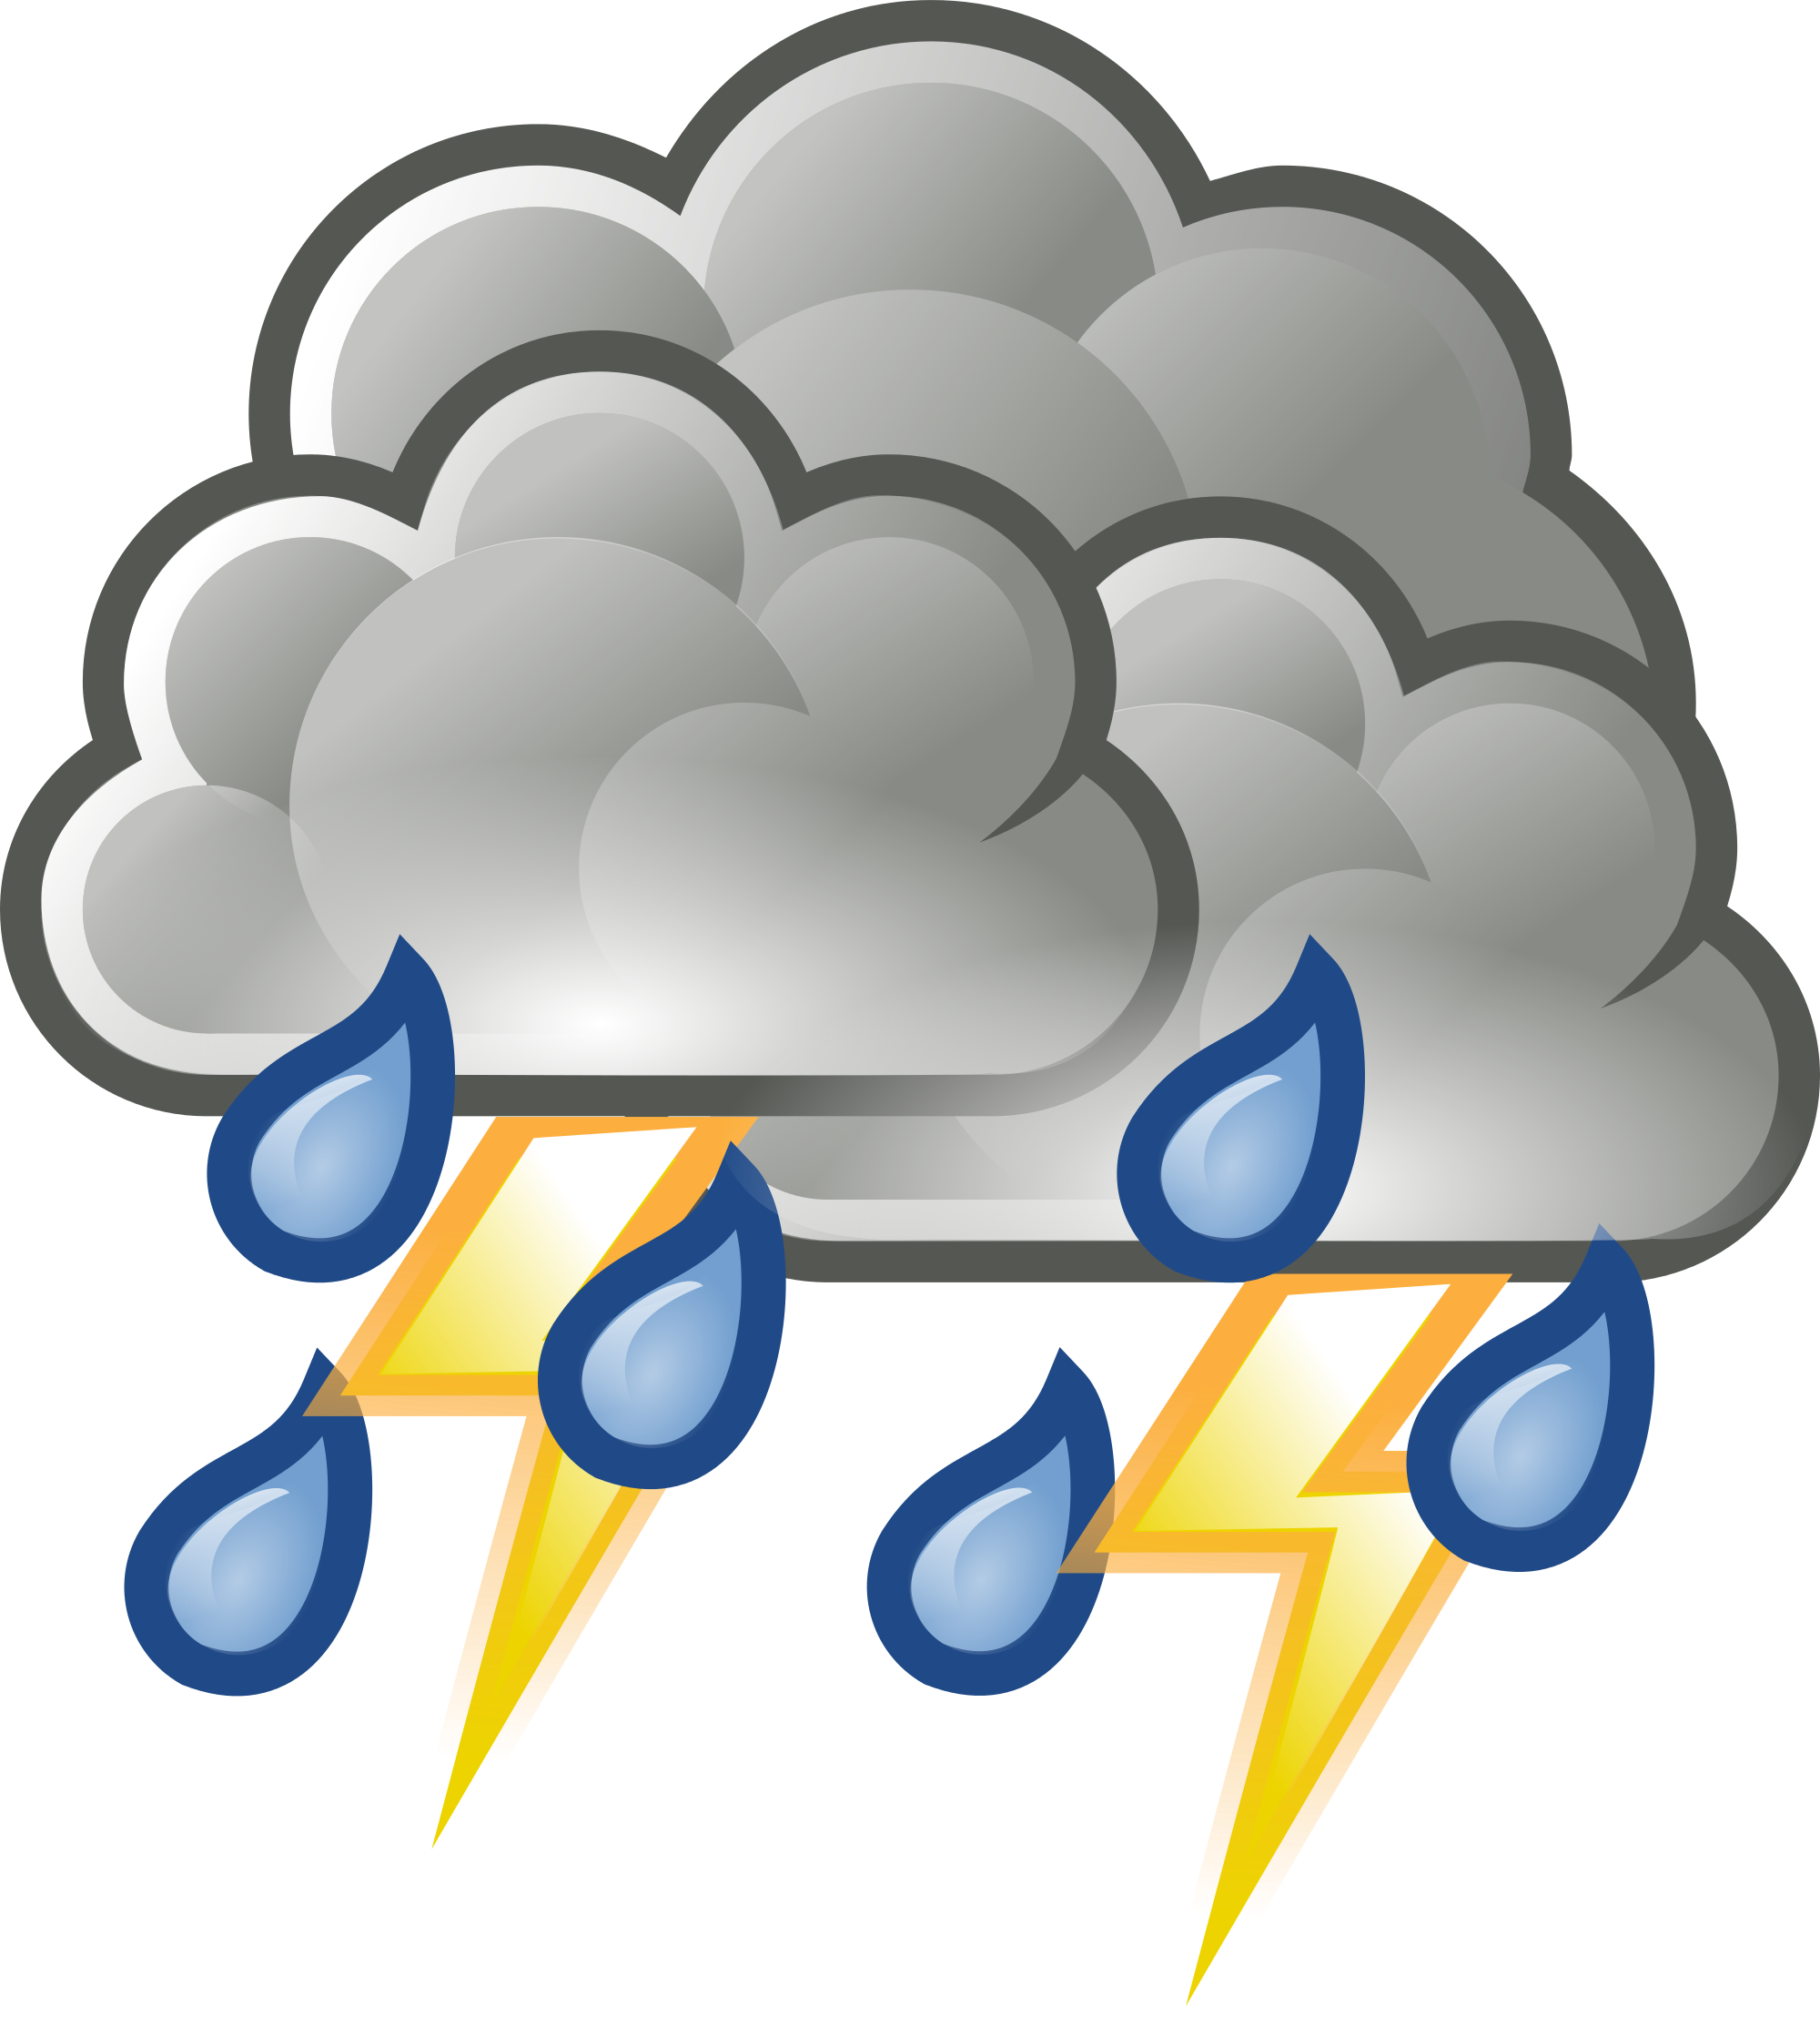 Storm Cloud With Lightning Clipart - Free Lightning Storm Cliparts ...